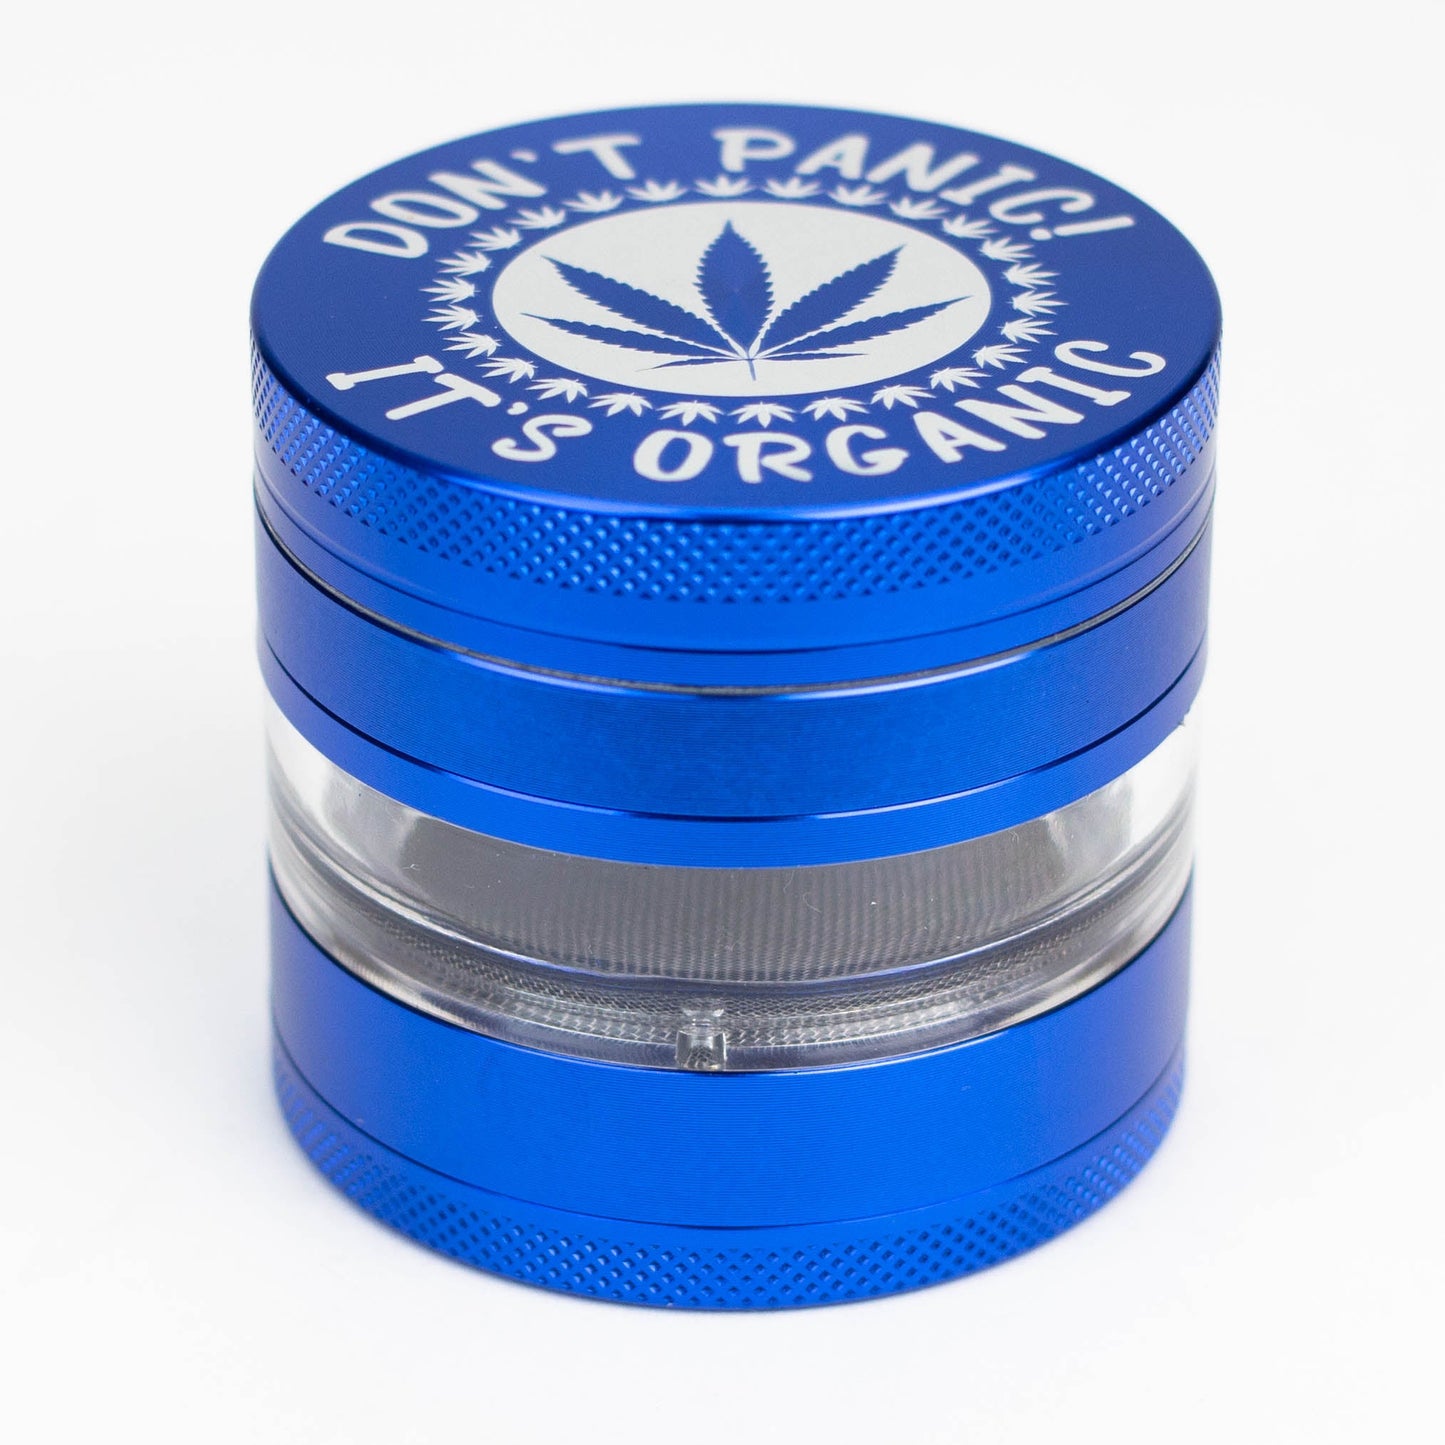 Heavy Duty Large "Don't Panic It's Organic" 4 Parts Weed Grinder Engraved in Canada_12